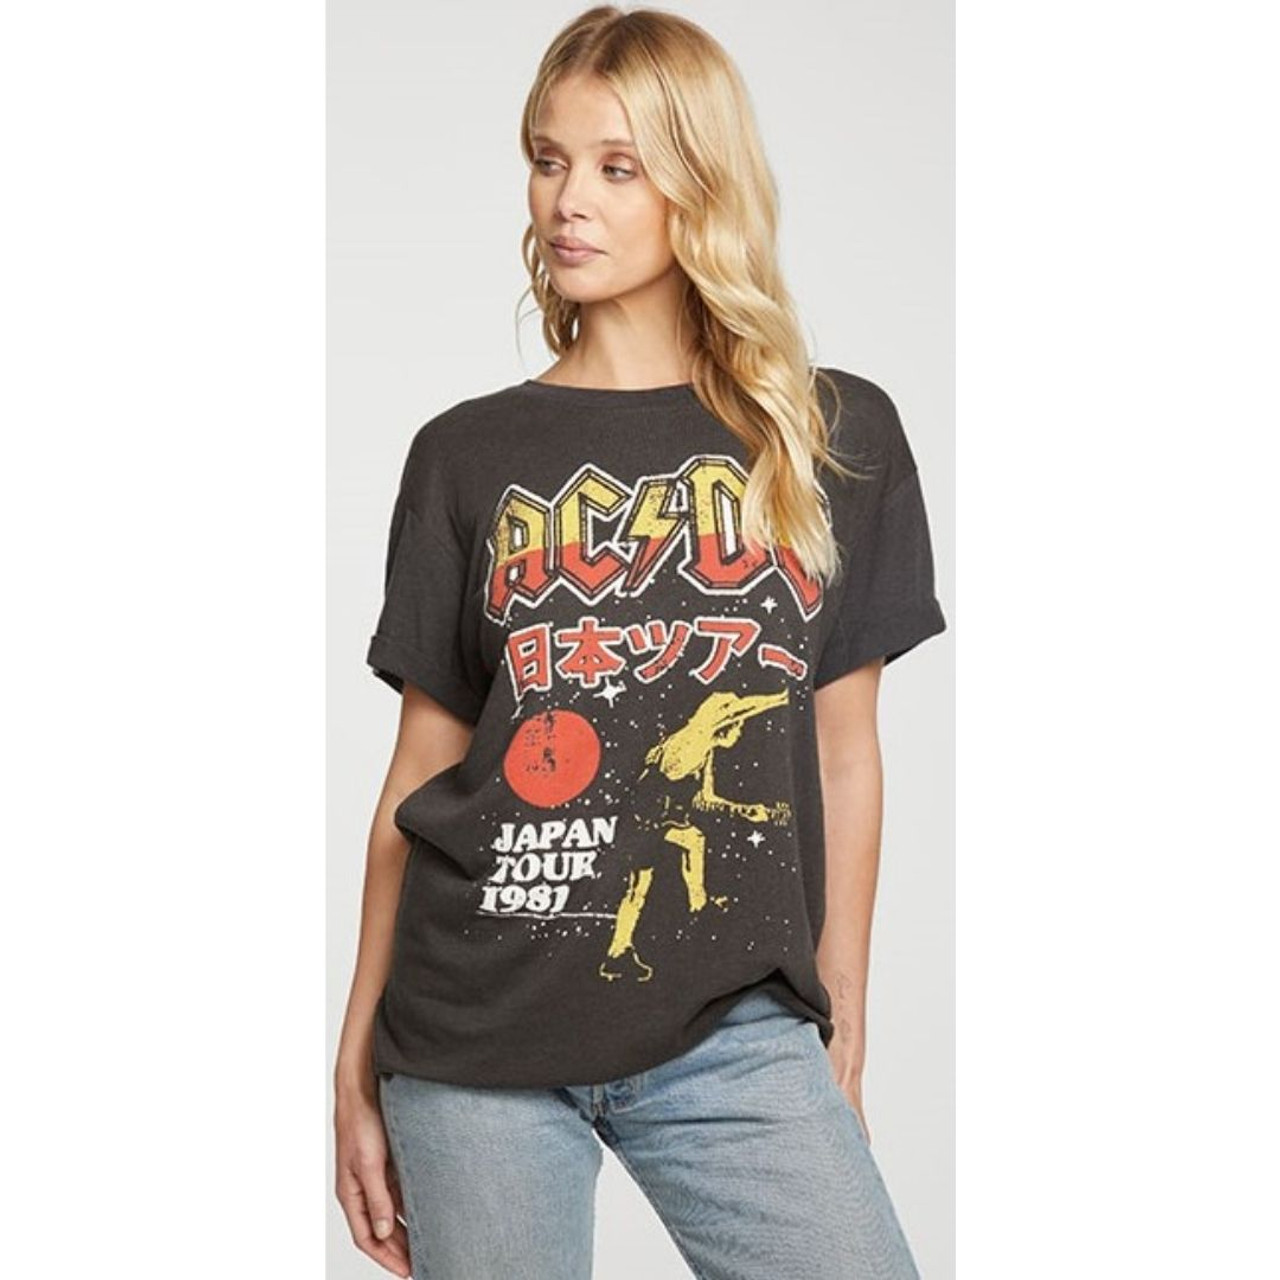 Alice Rock in Band Chains T-Shirts Teen Men's Casual Tee Fashion